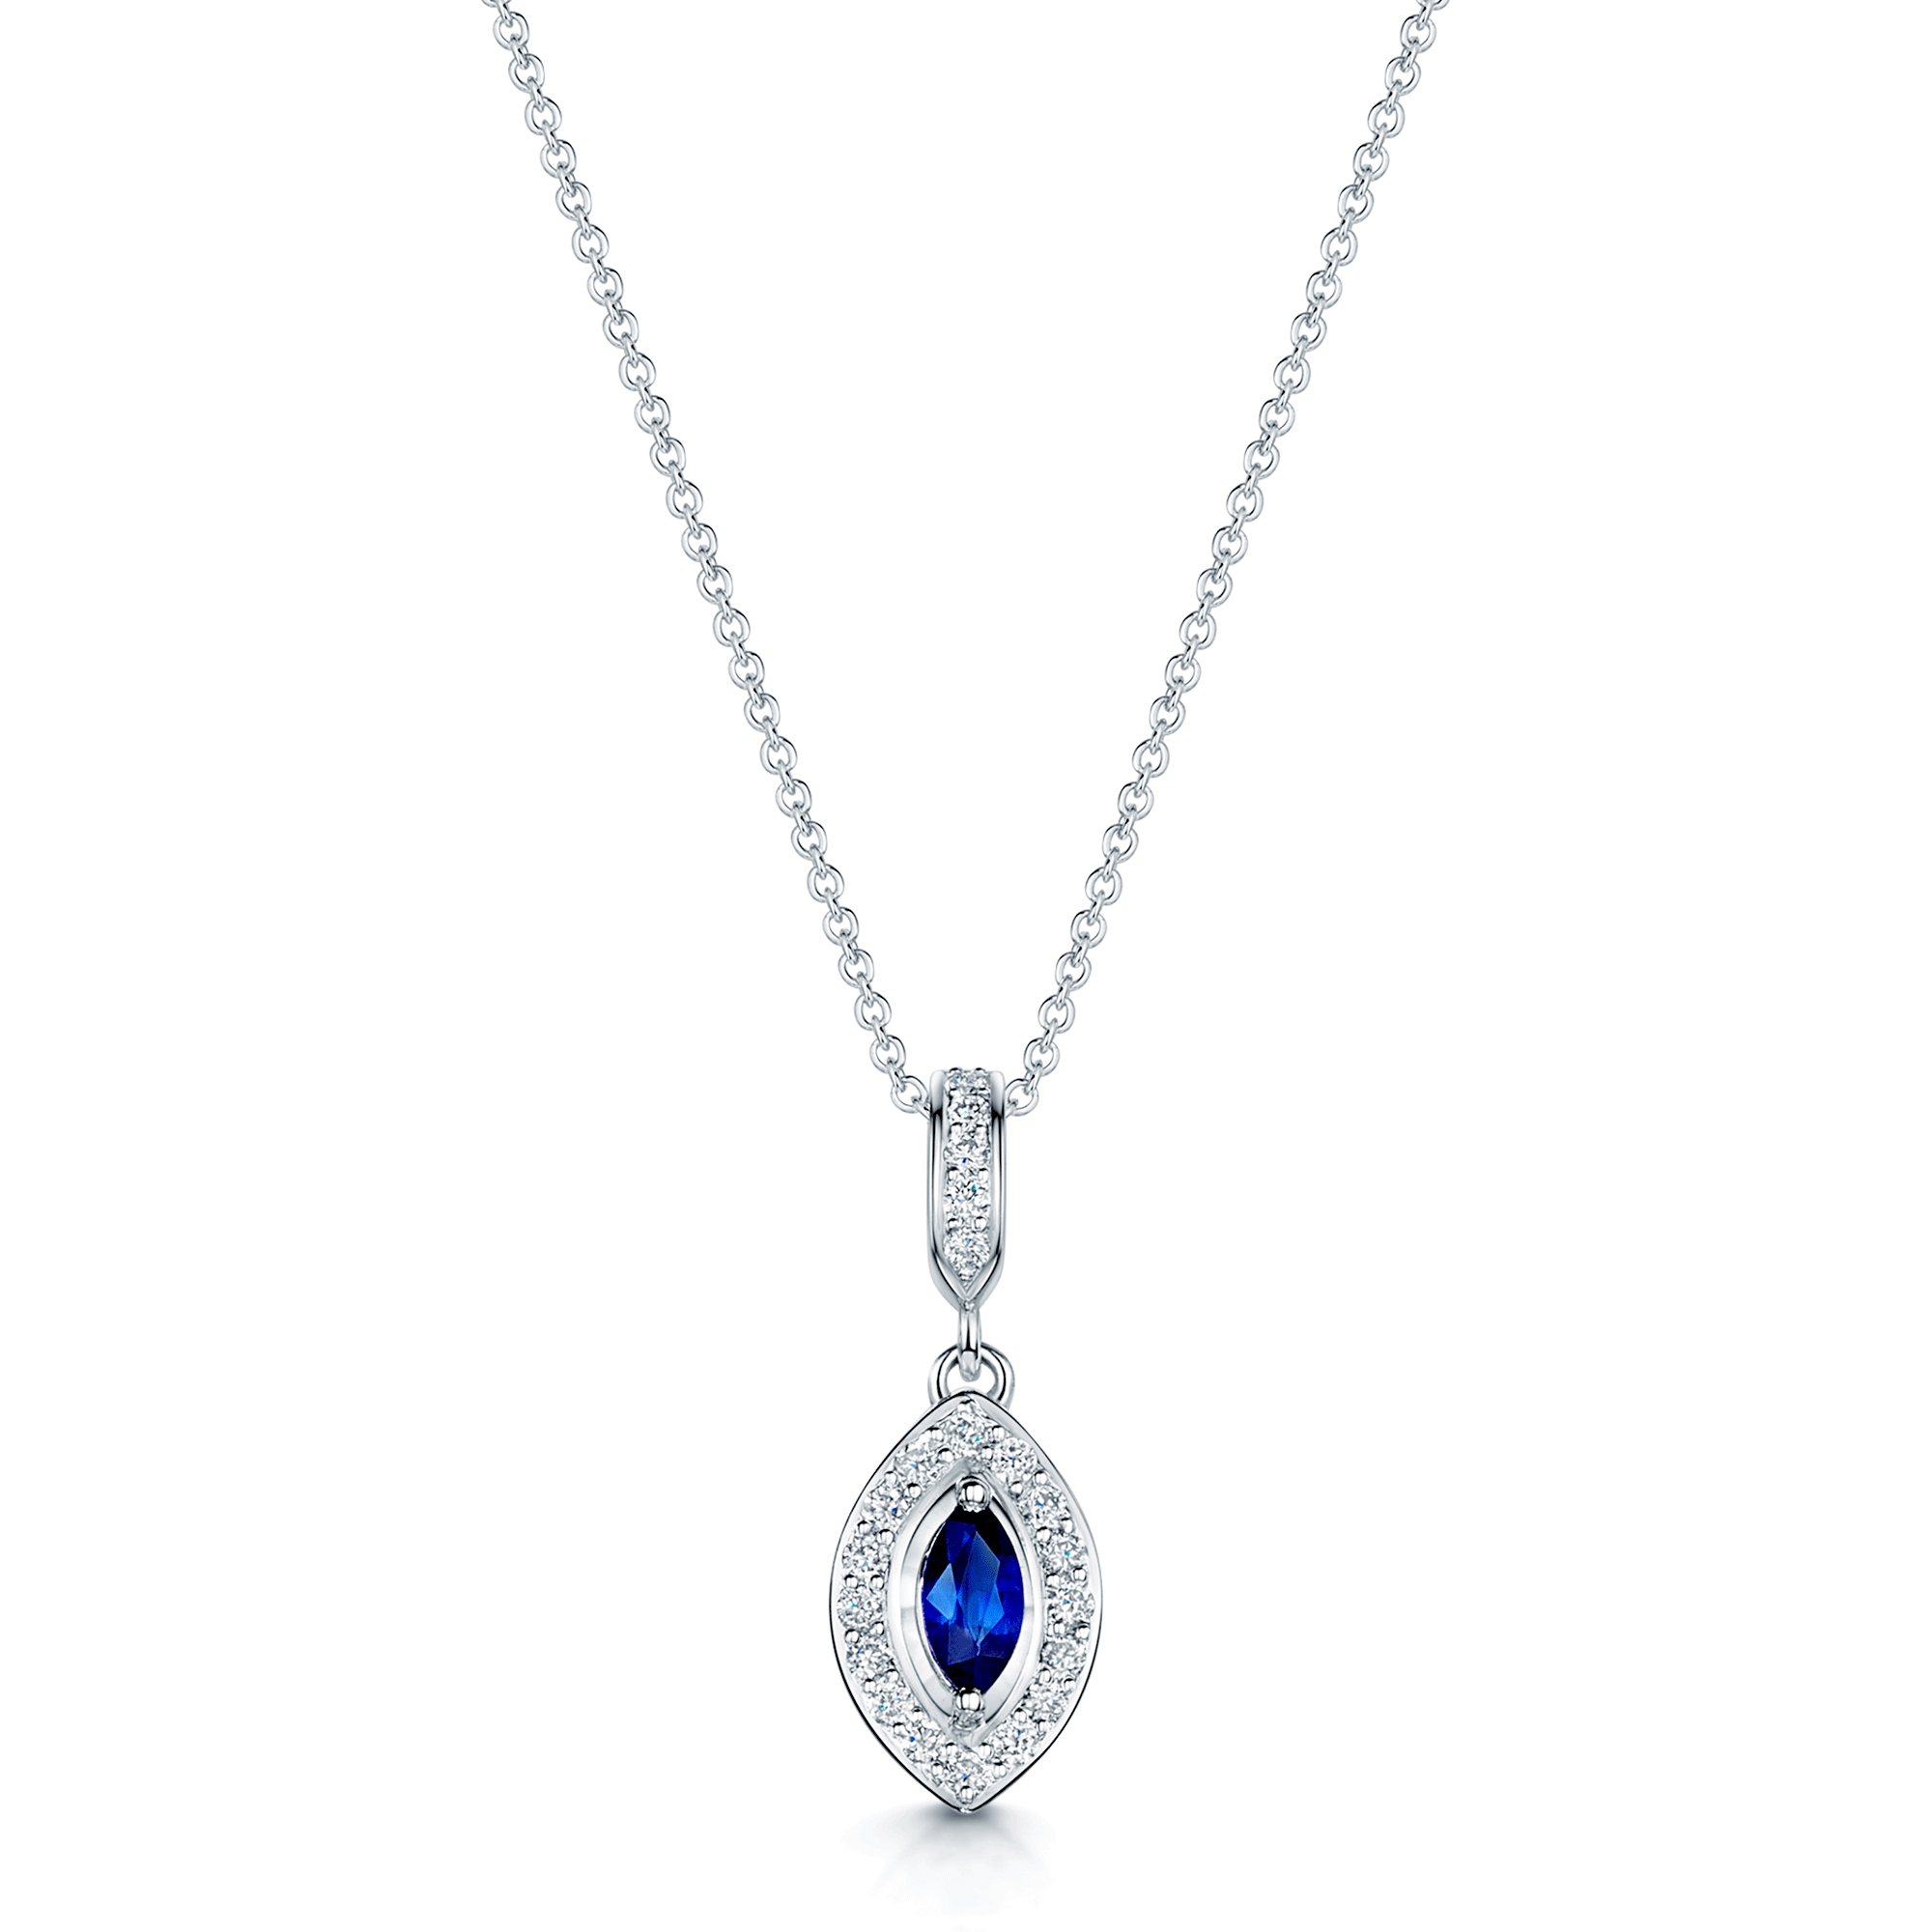 18ct White Gold Marquise Cut Sapphire And Diamond Pendant